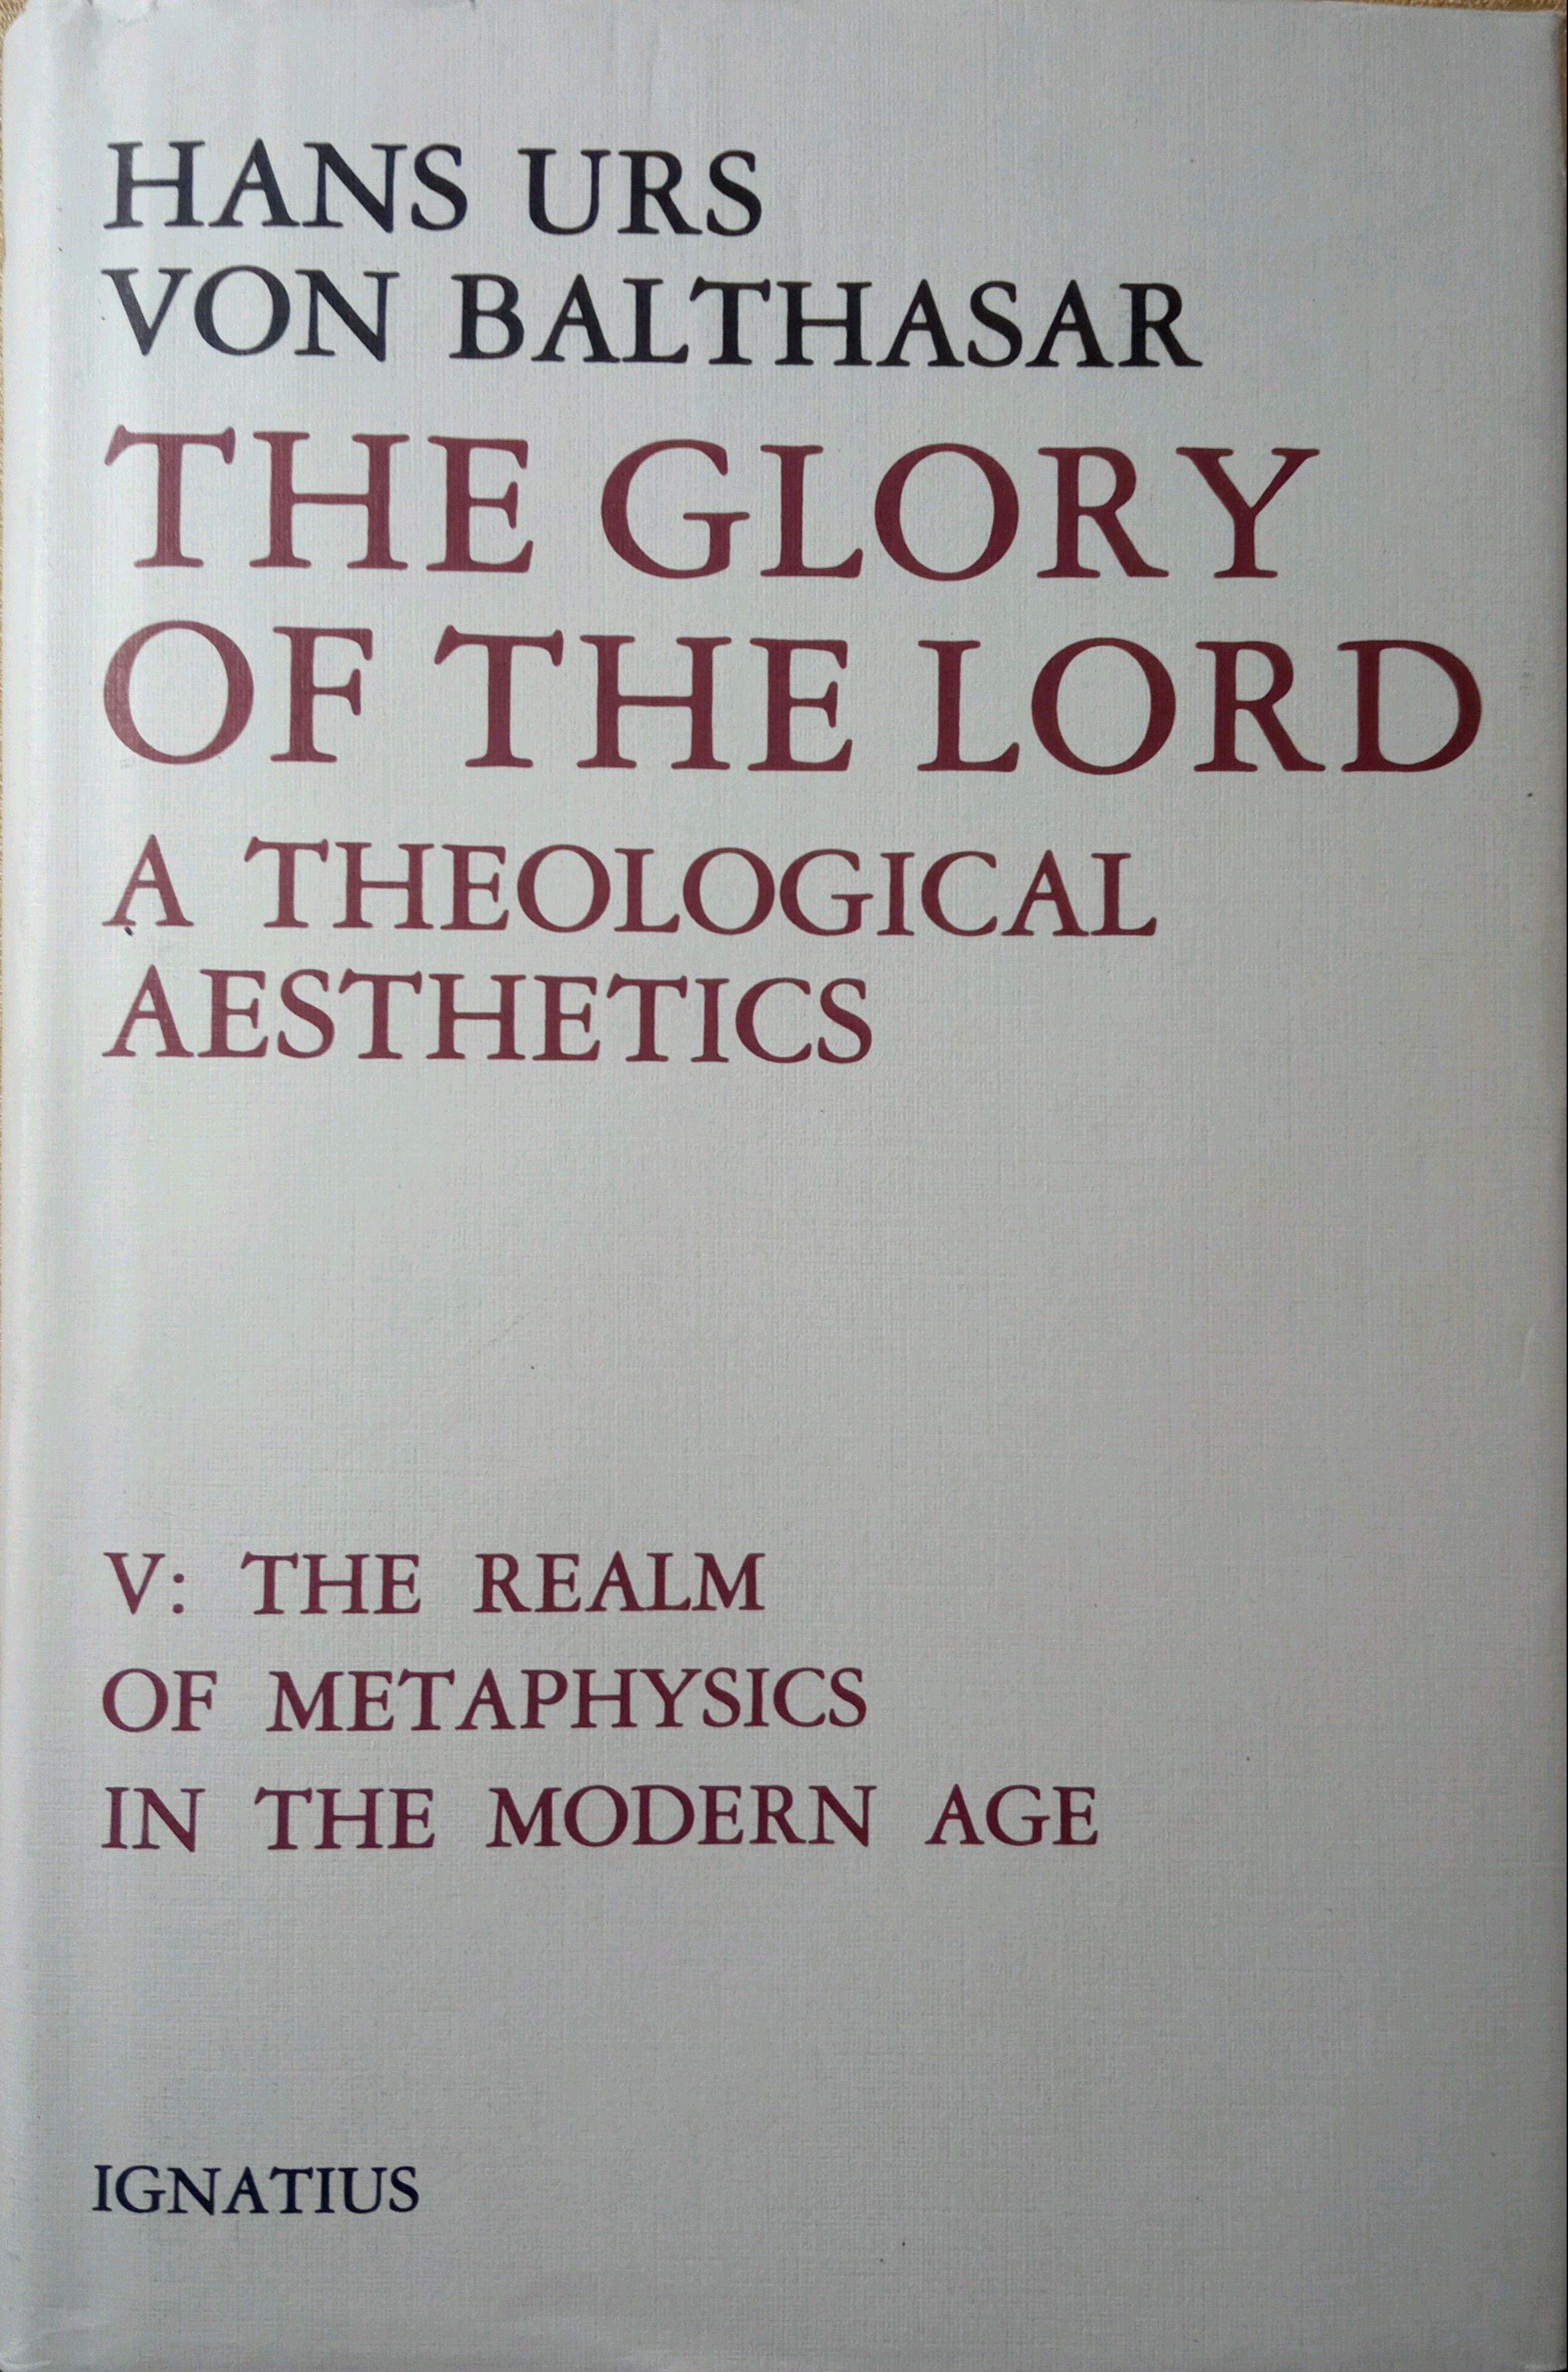 THE GLORY OF THE LORD: A THEOLOGICAL AESTHETICS. THE REALM OF METAPHYSICS IN THE MODERN AGE